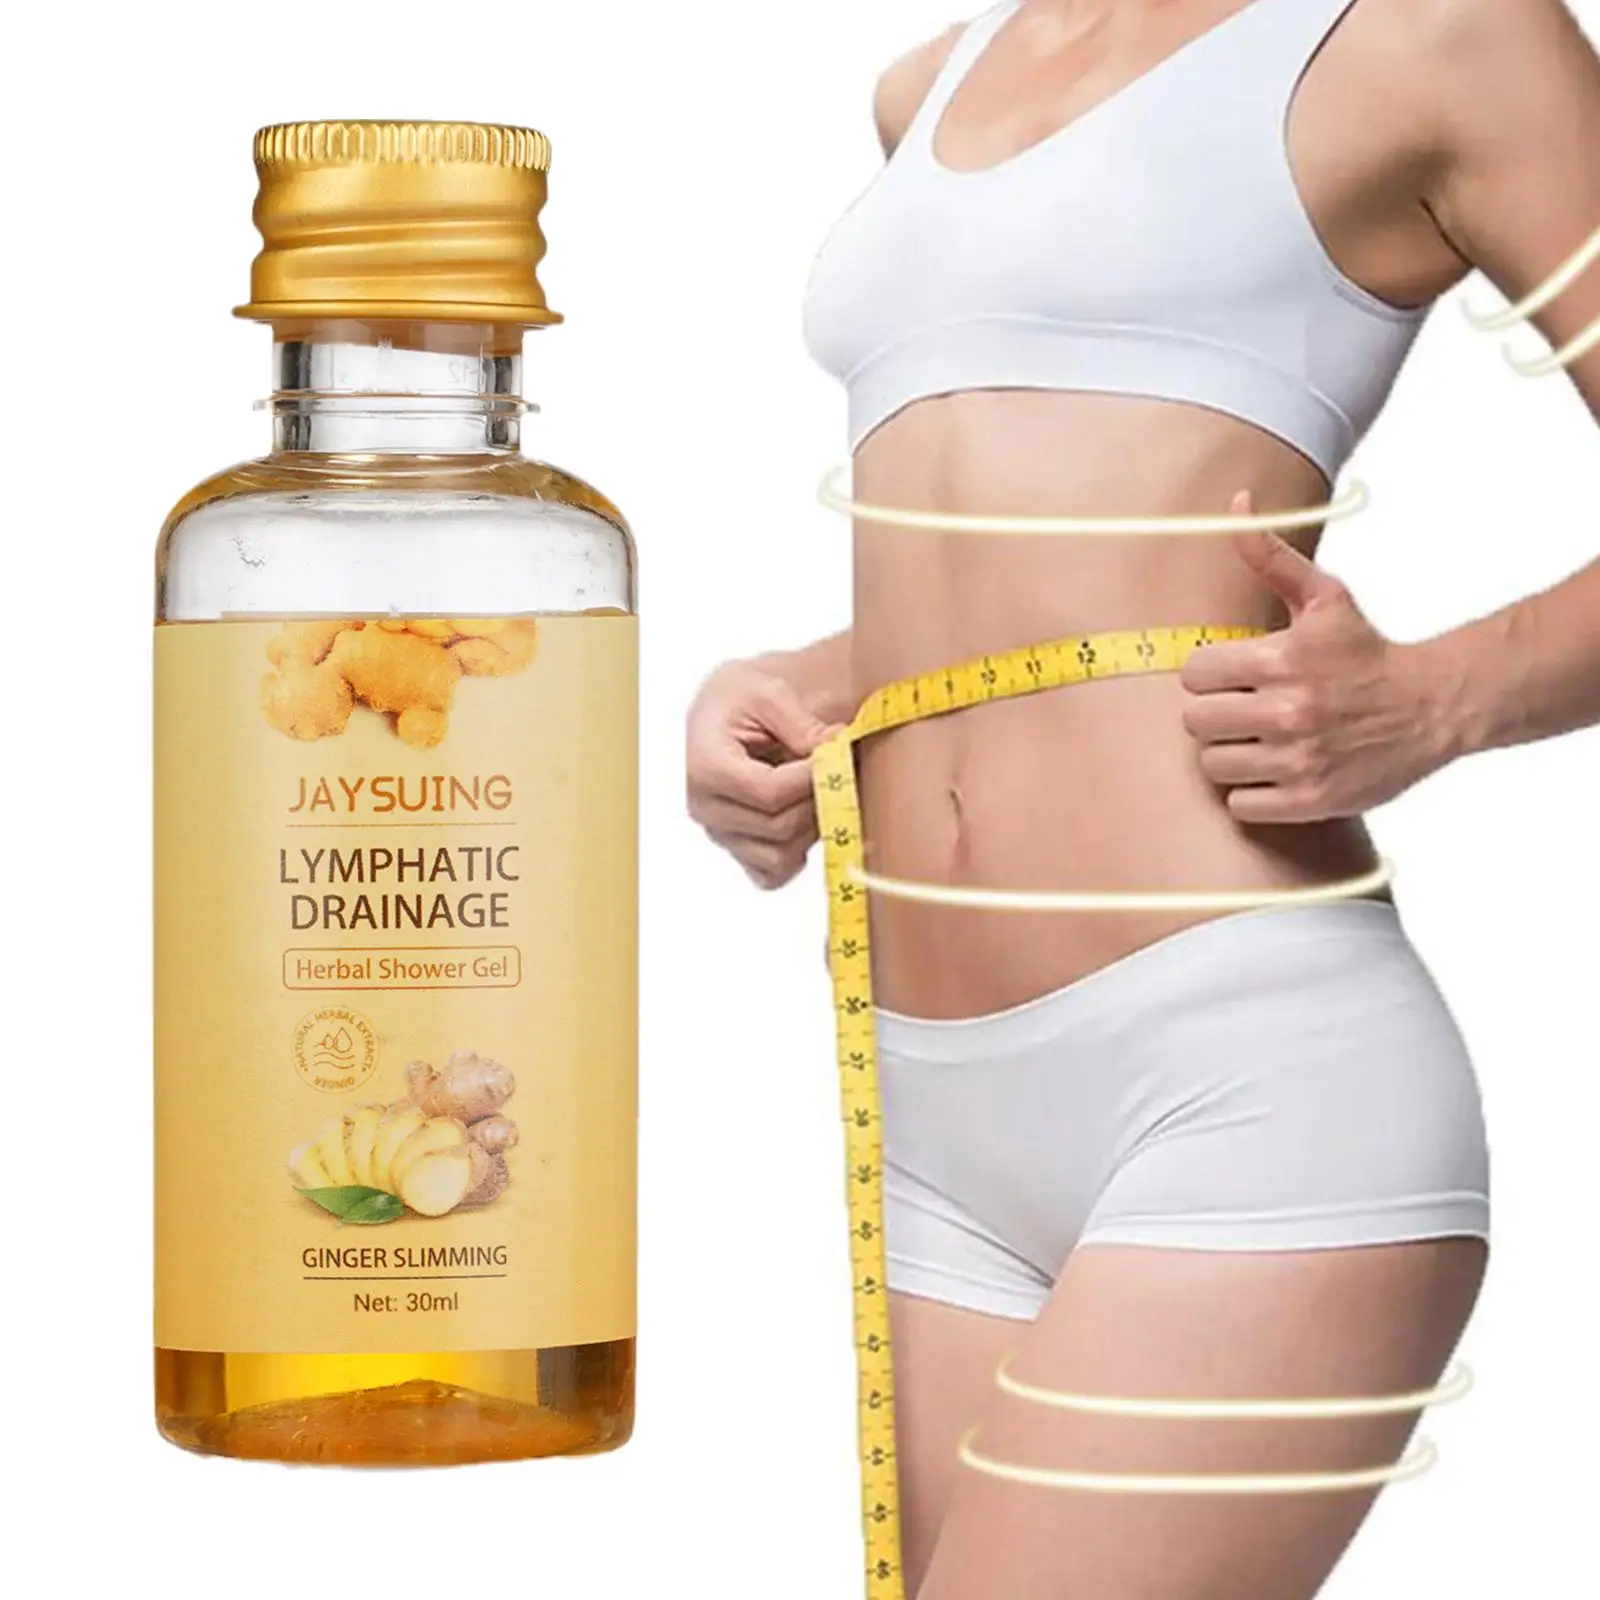 

1pcs 30ml Ginger Slimming Losing Weight Cellulite Remover Lymphatic Drainage Herbal Shower Gel Beauty Health Firm Body Care